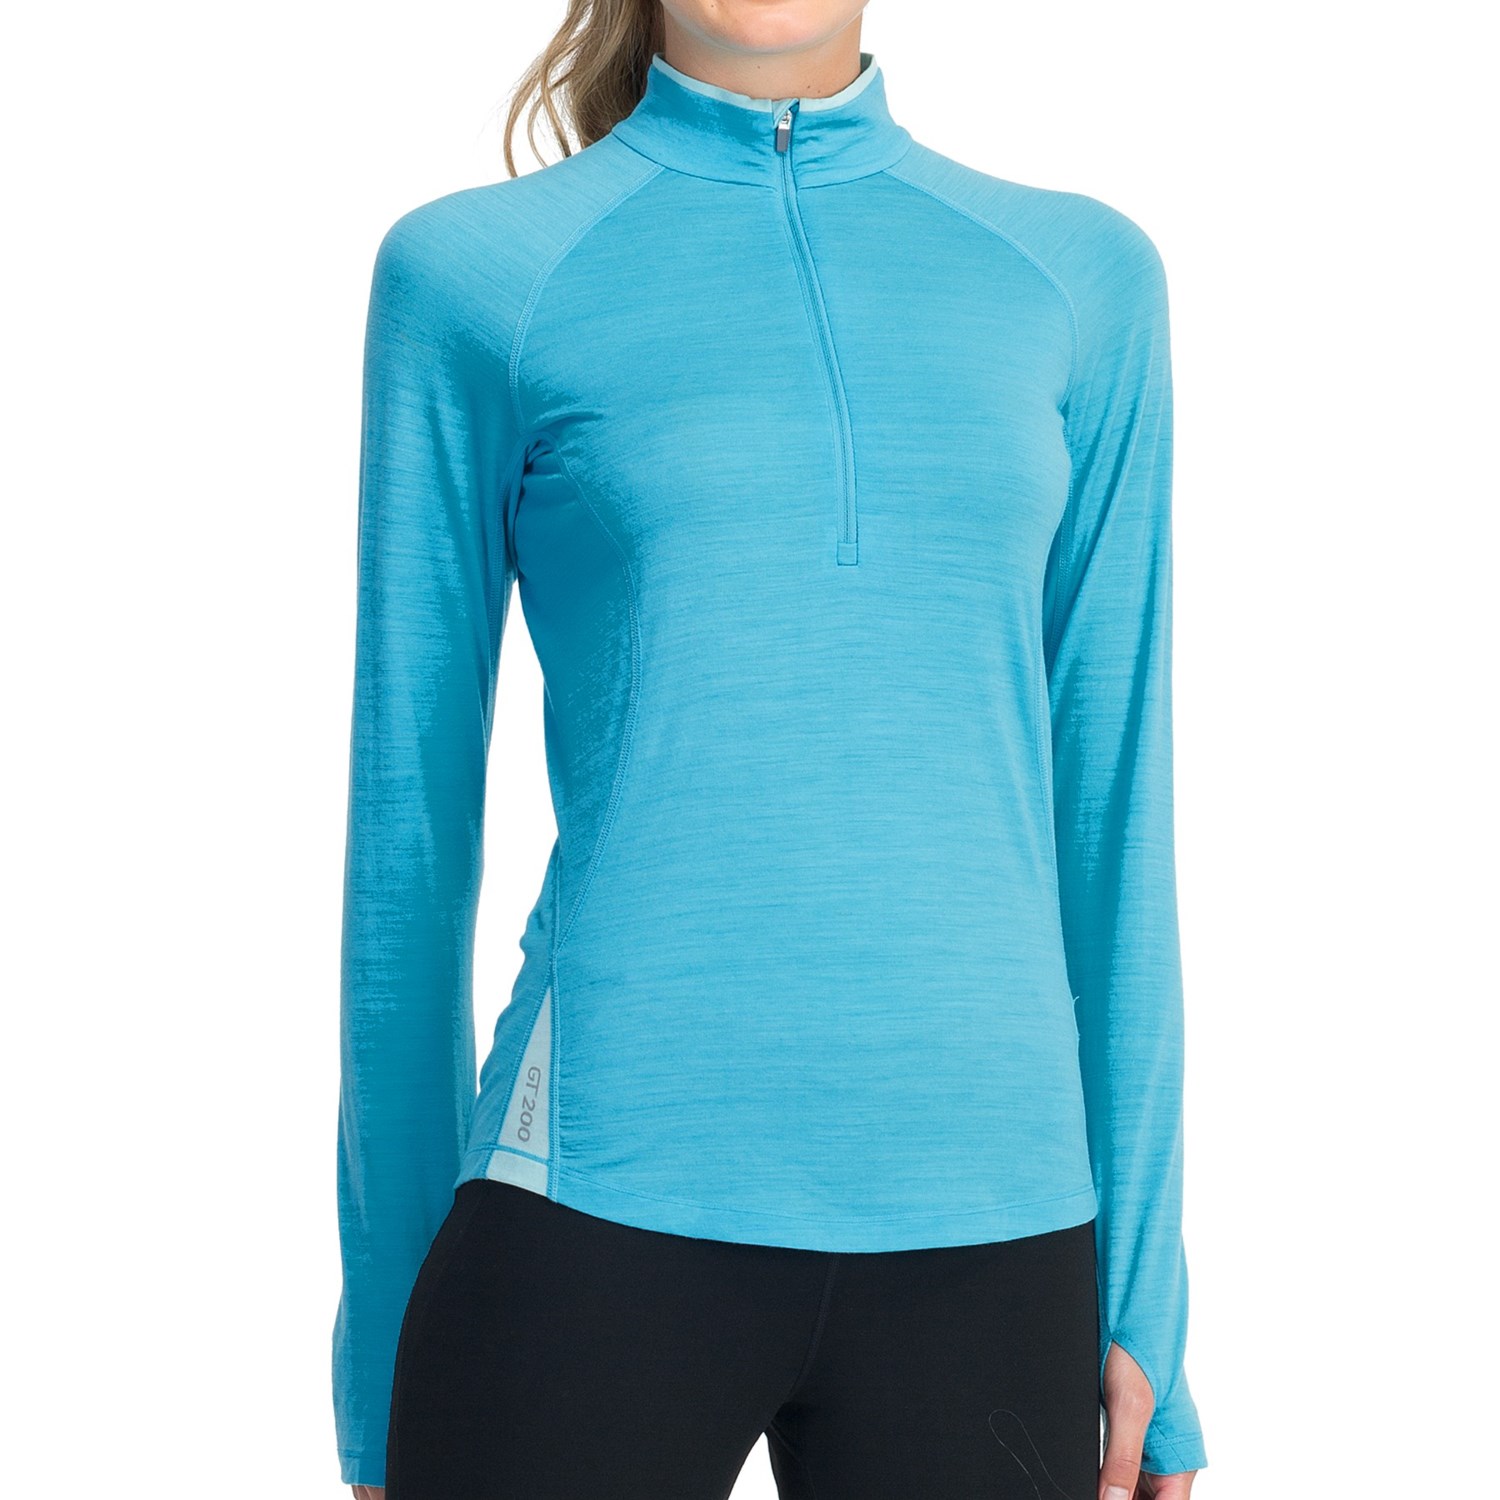 Icebreaker GT 200 Pace Base Layer Top (For Women) 4743H - Save 45%